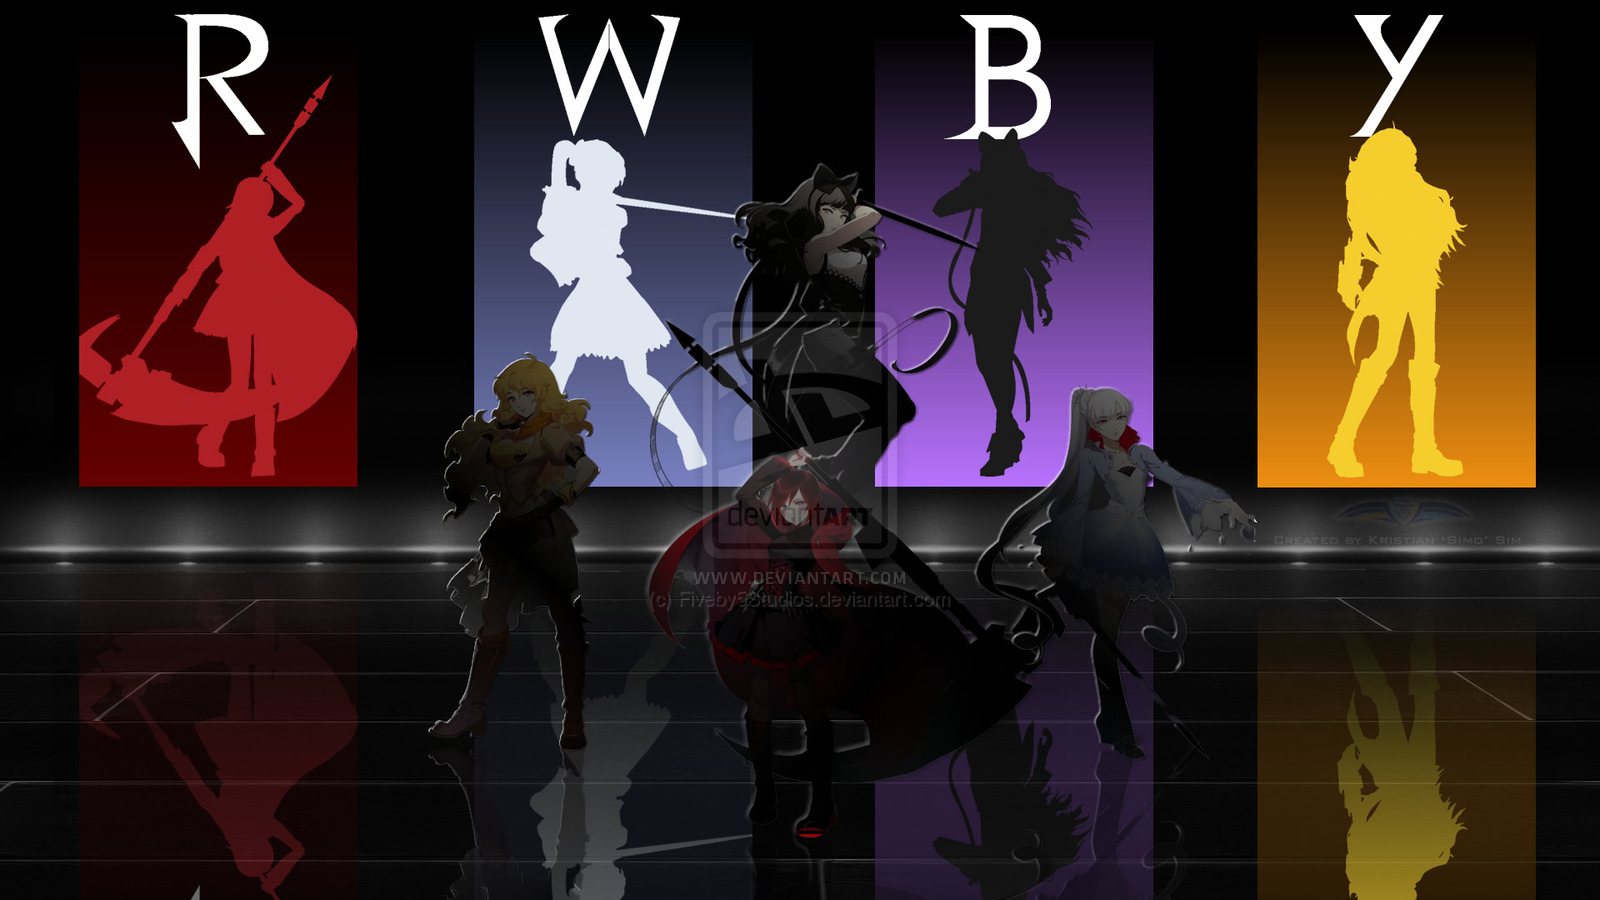 Rwby Wallpaper By Fiveby5studios Fan Art Movies Tv Made To